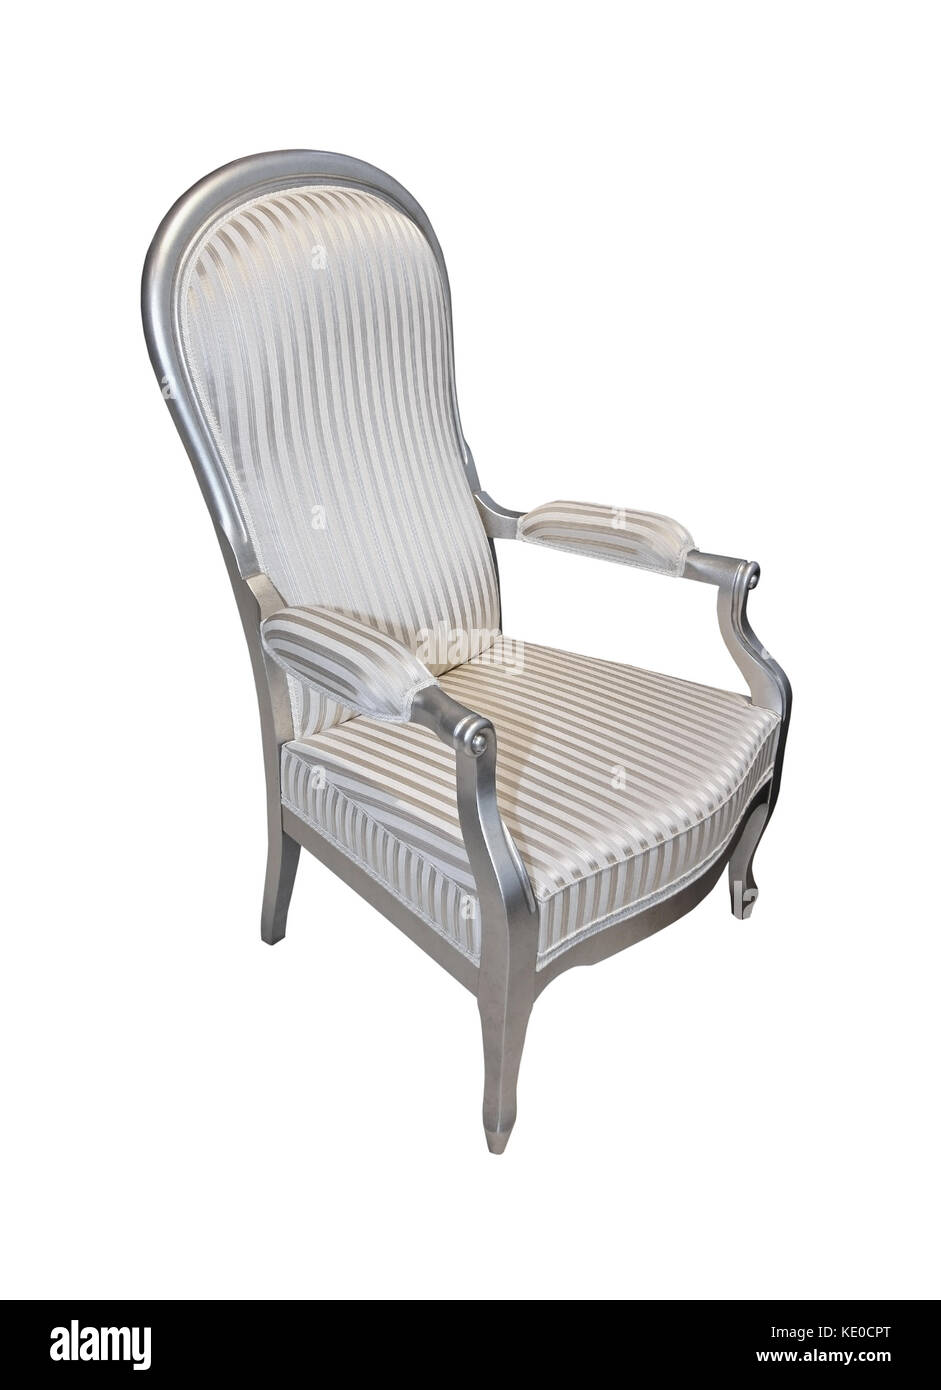 Old vintage silver chair isolated with clipping path included Stock Photo